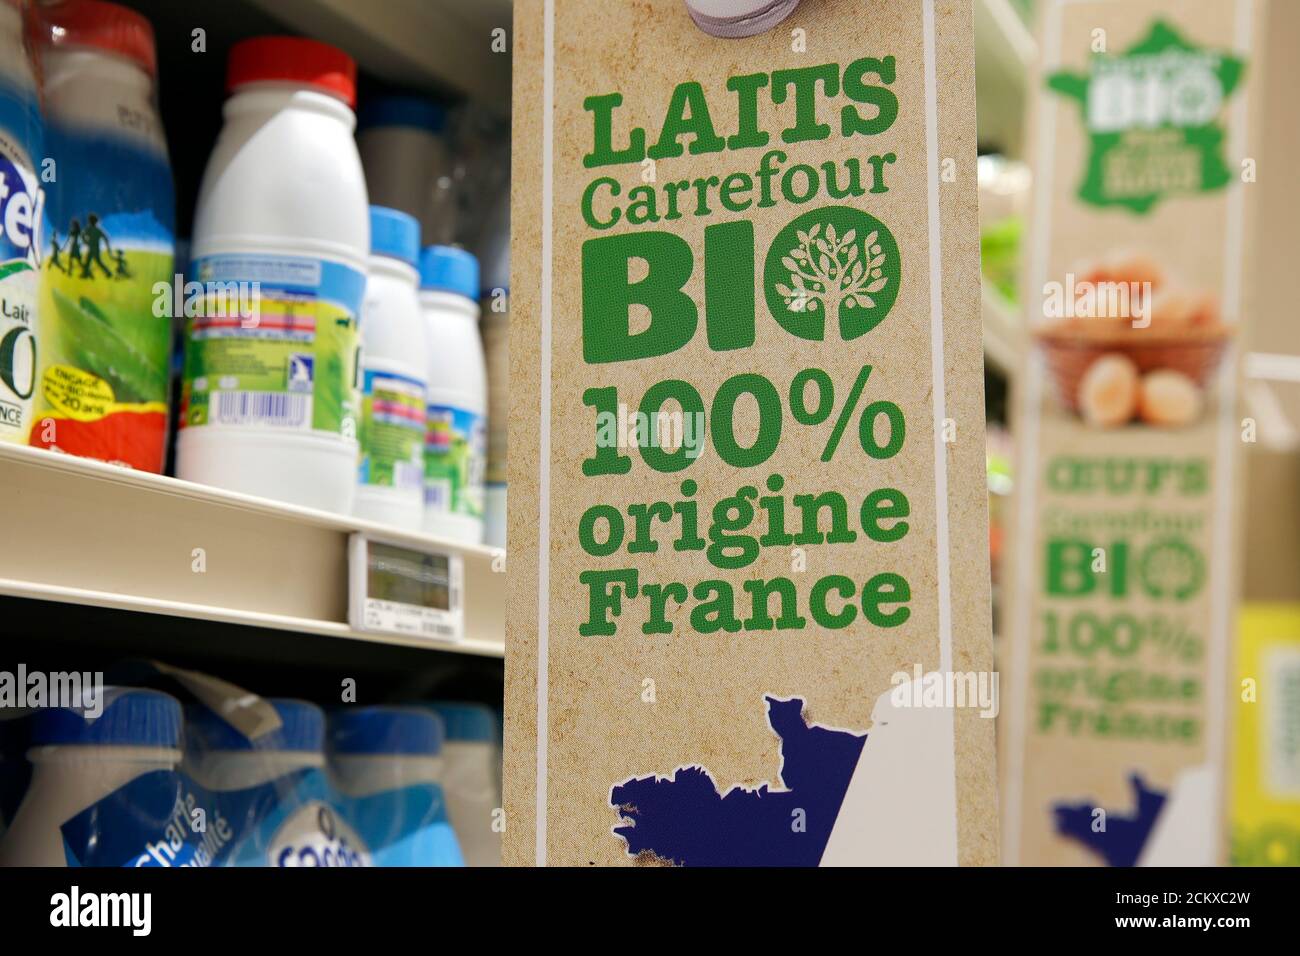 Organic products are displayed in the Bio foods section at the Carrefour  supermarket in Lille, France,